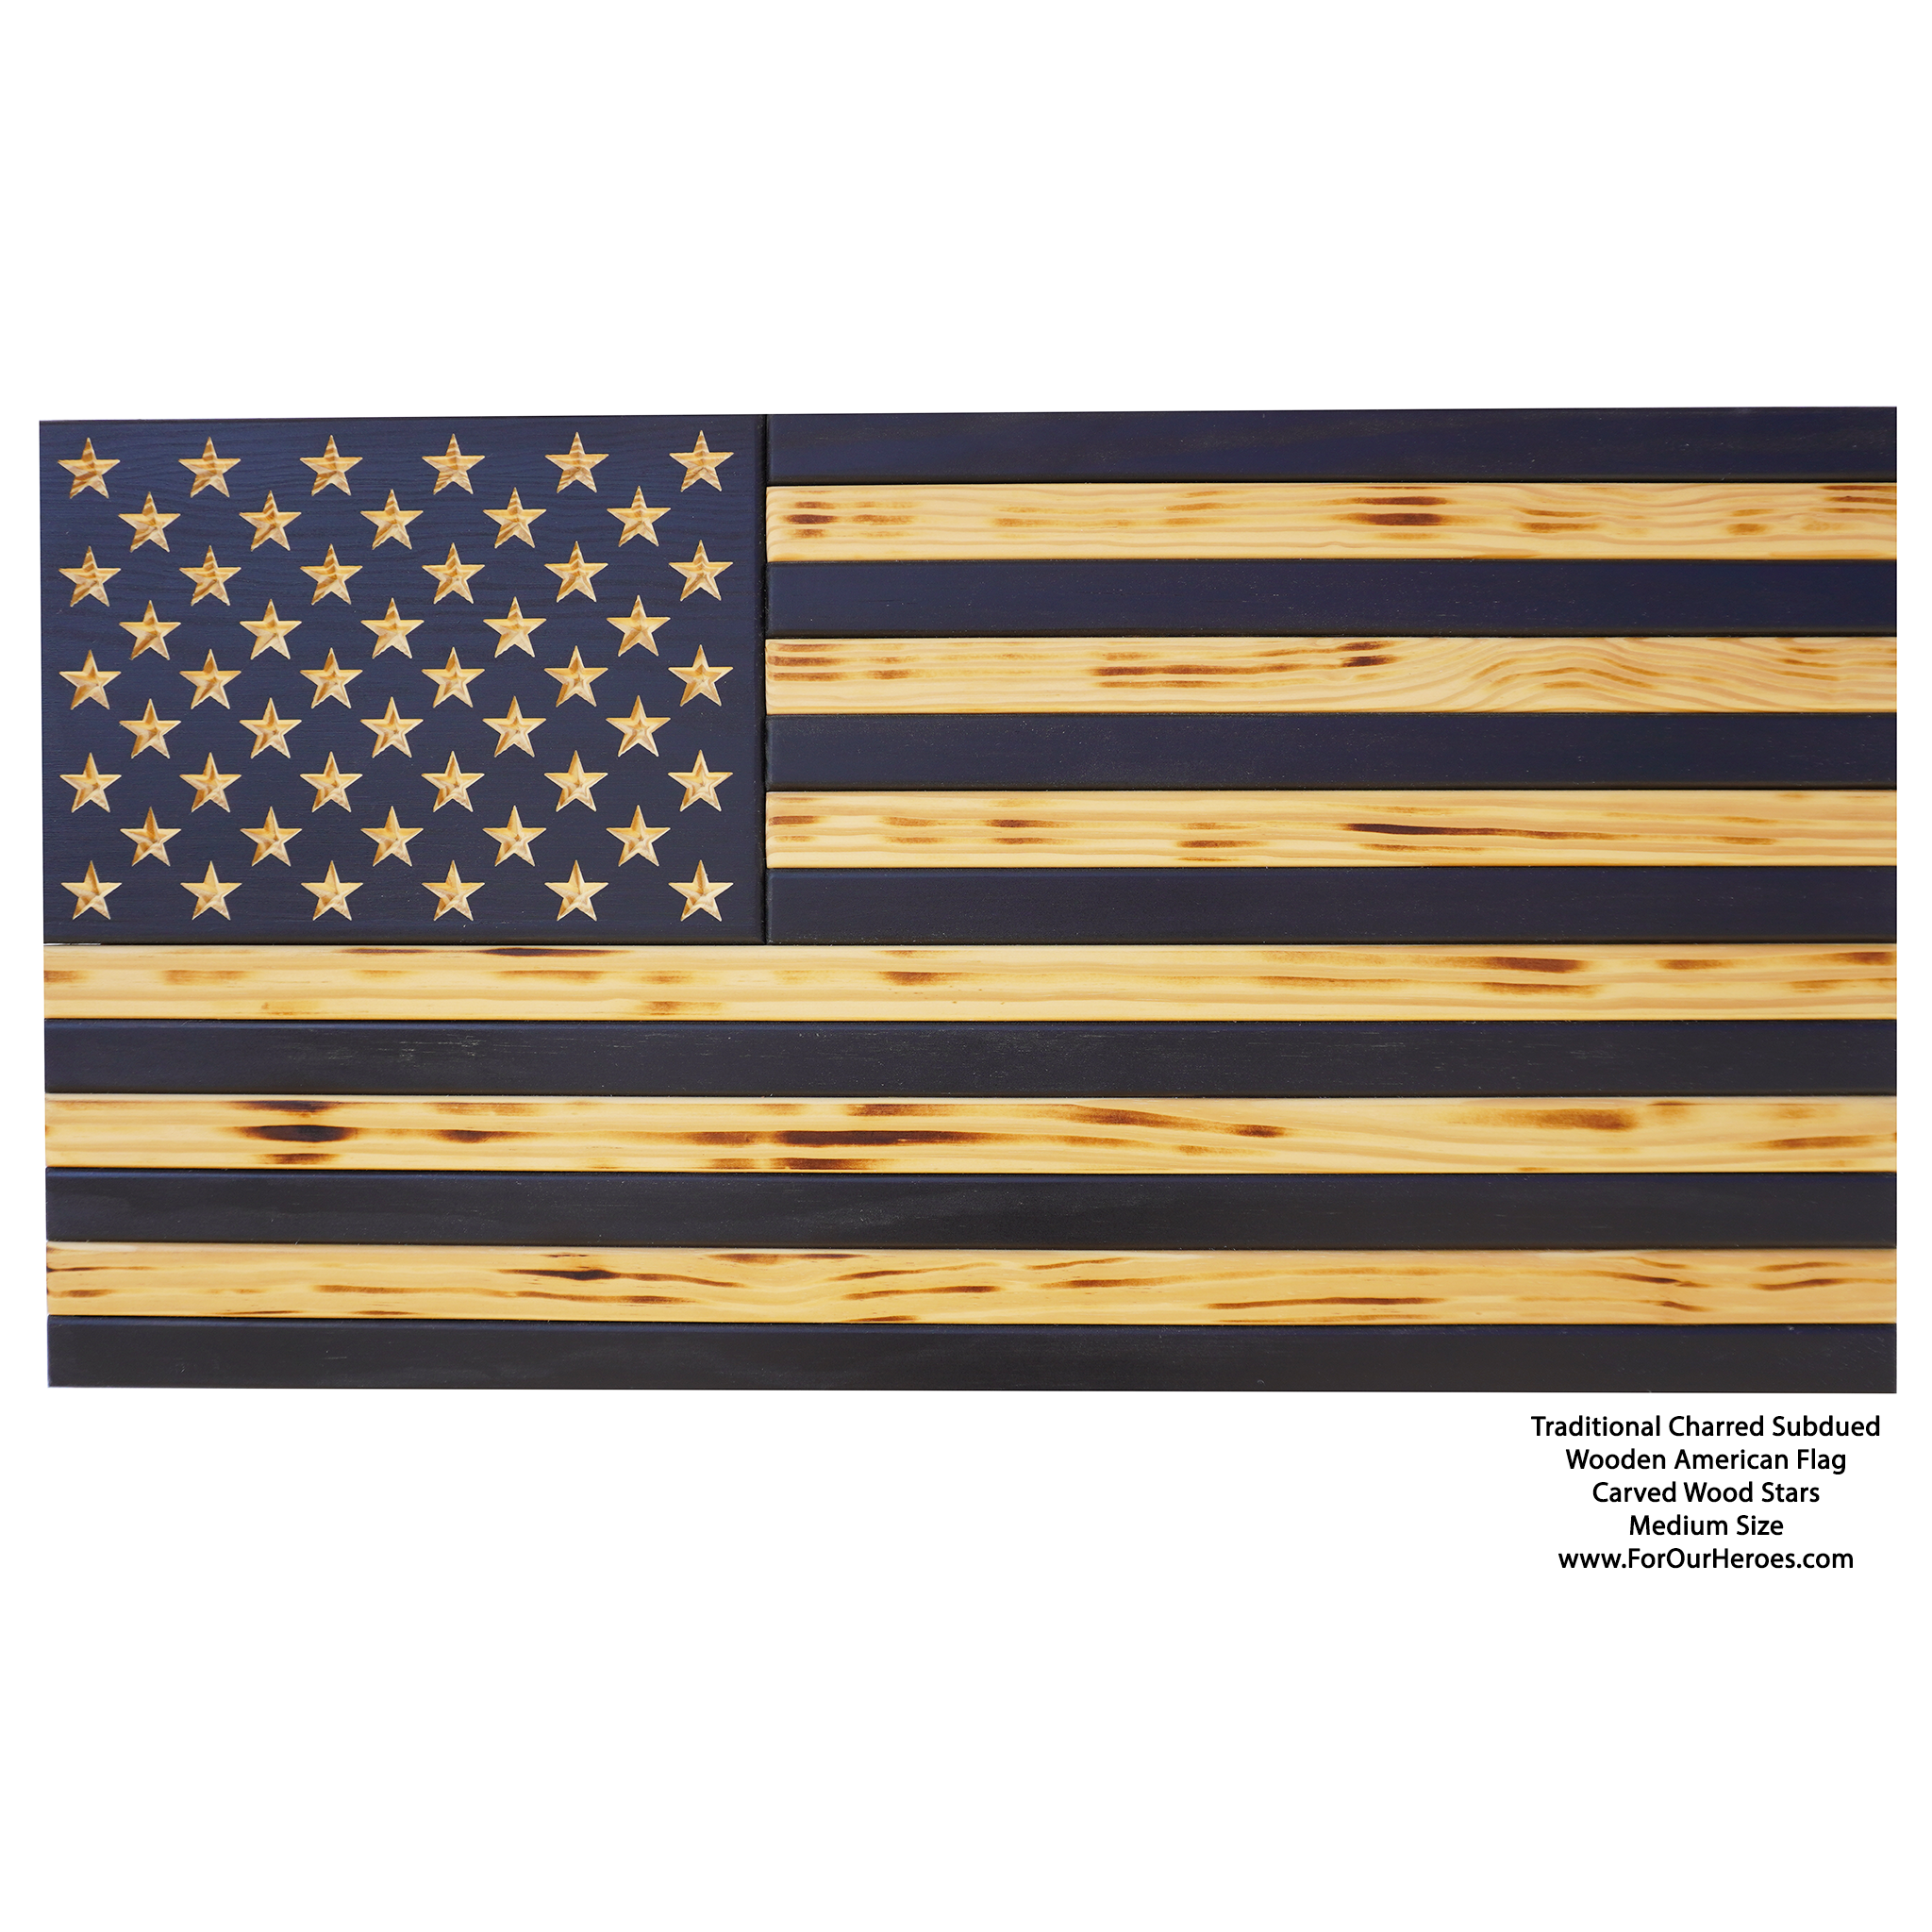 2D TRADITIONAL SUBDUED American Flag (carved stars) - 0